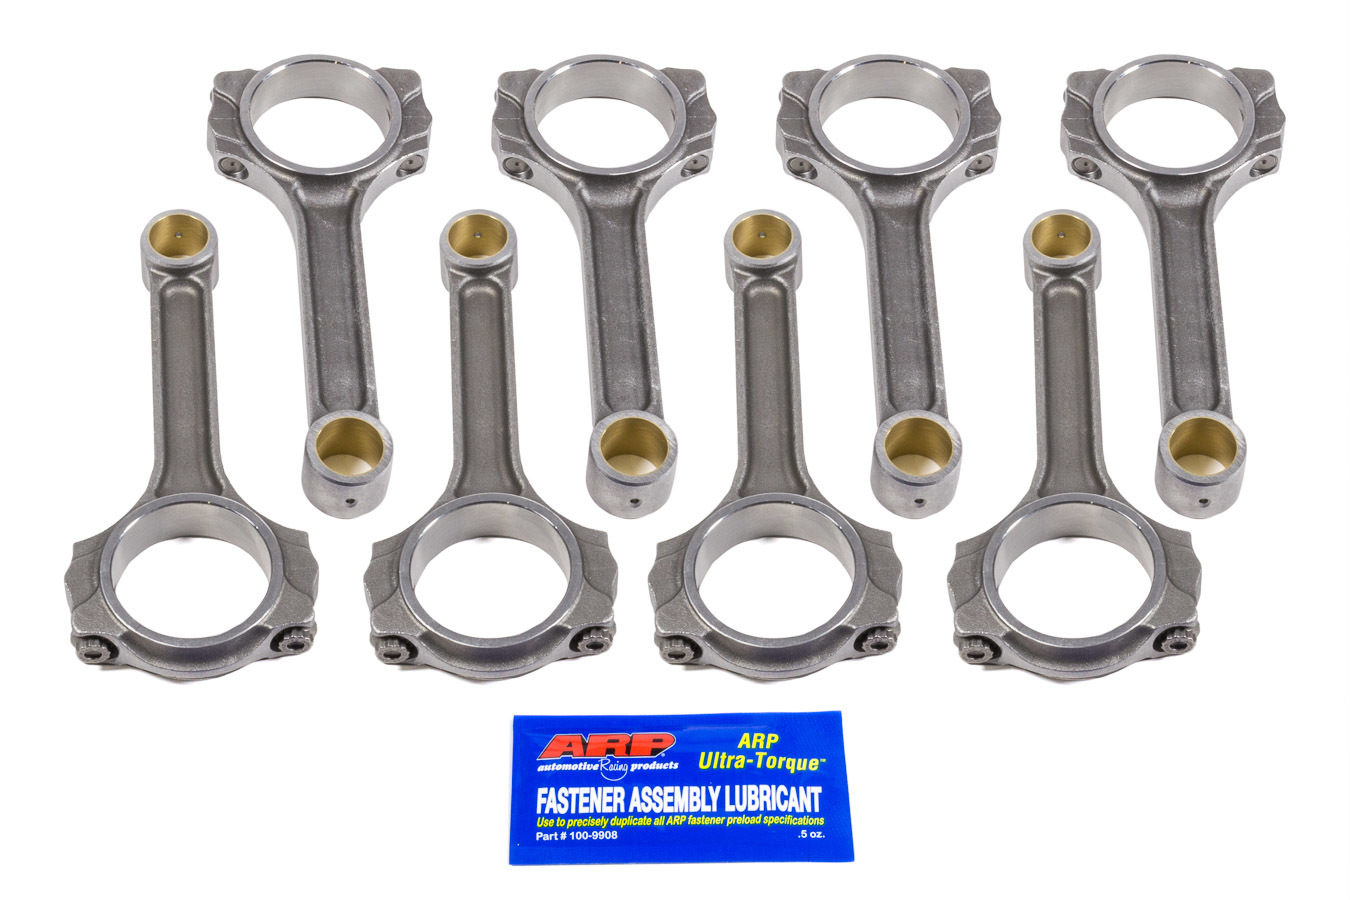 Scat 2-ICR6000-2000-7/16 - Connecting Rod, I Beam, 6.000 in Long, Bushed, 7/16 in Cap Screws, ARP8740, Forged Steel, Small Block Chevy, Set of 8